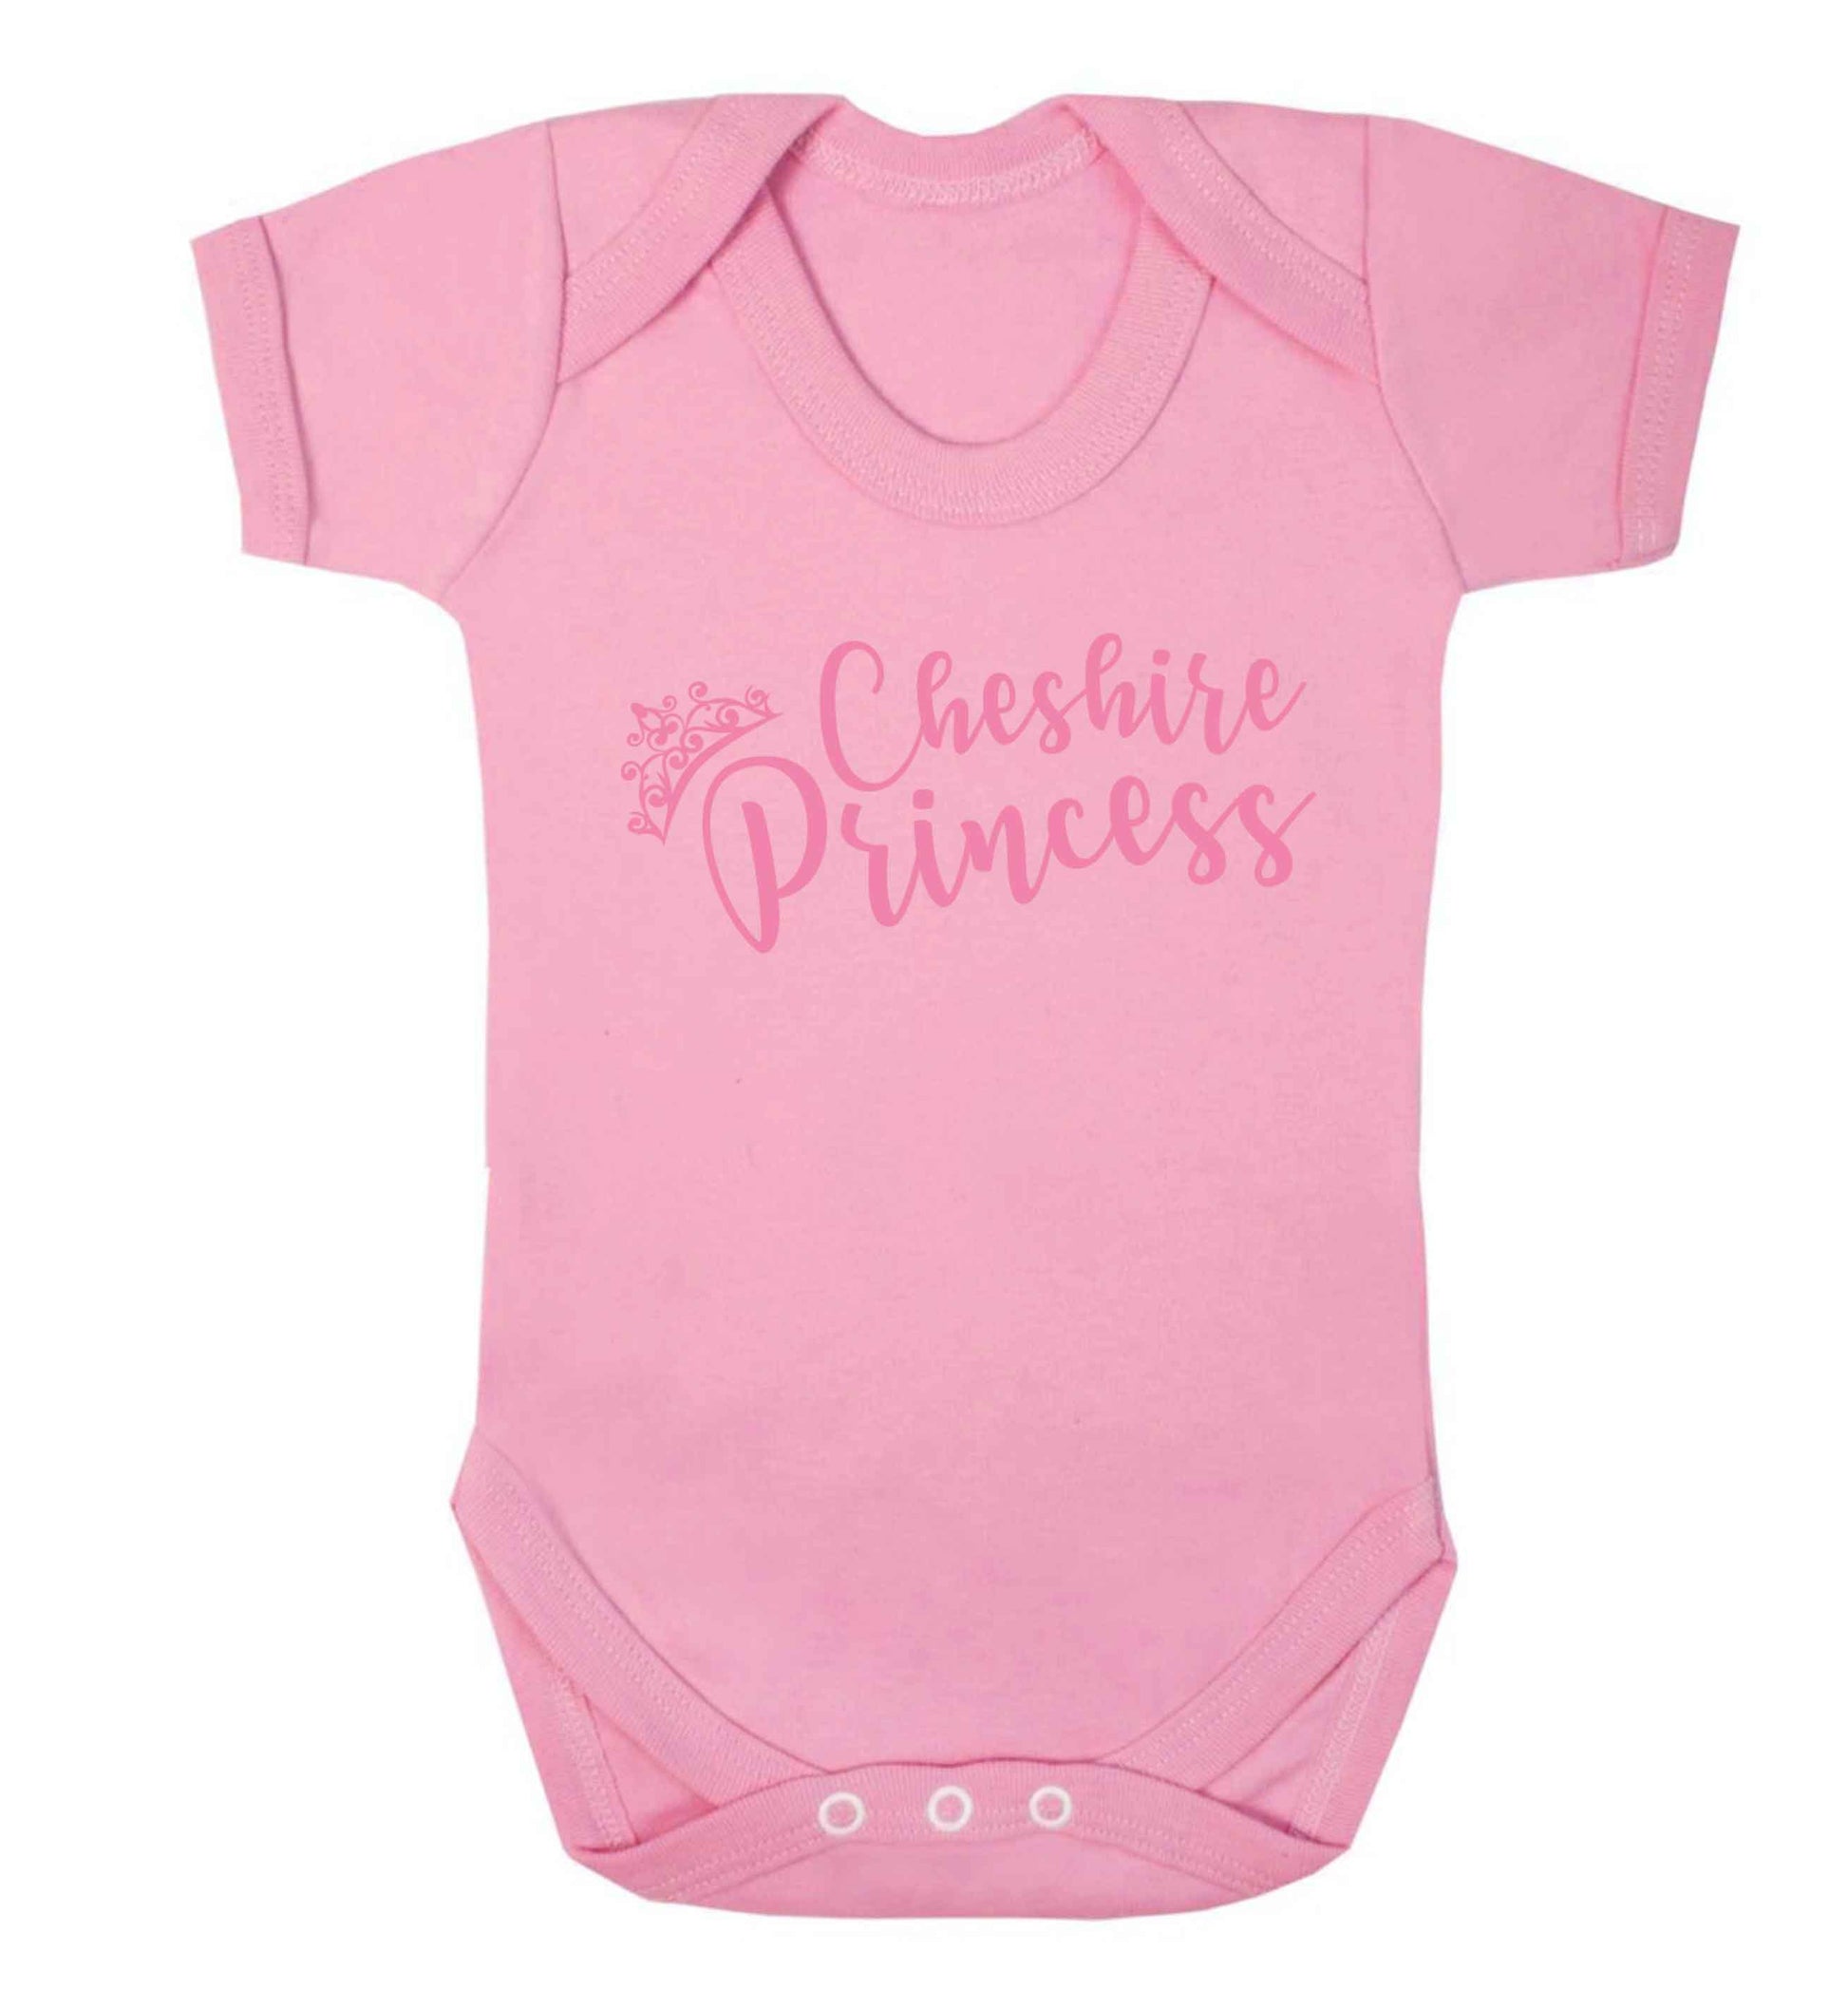 Cheshire princess Baby Vest pale pink 18-24 months